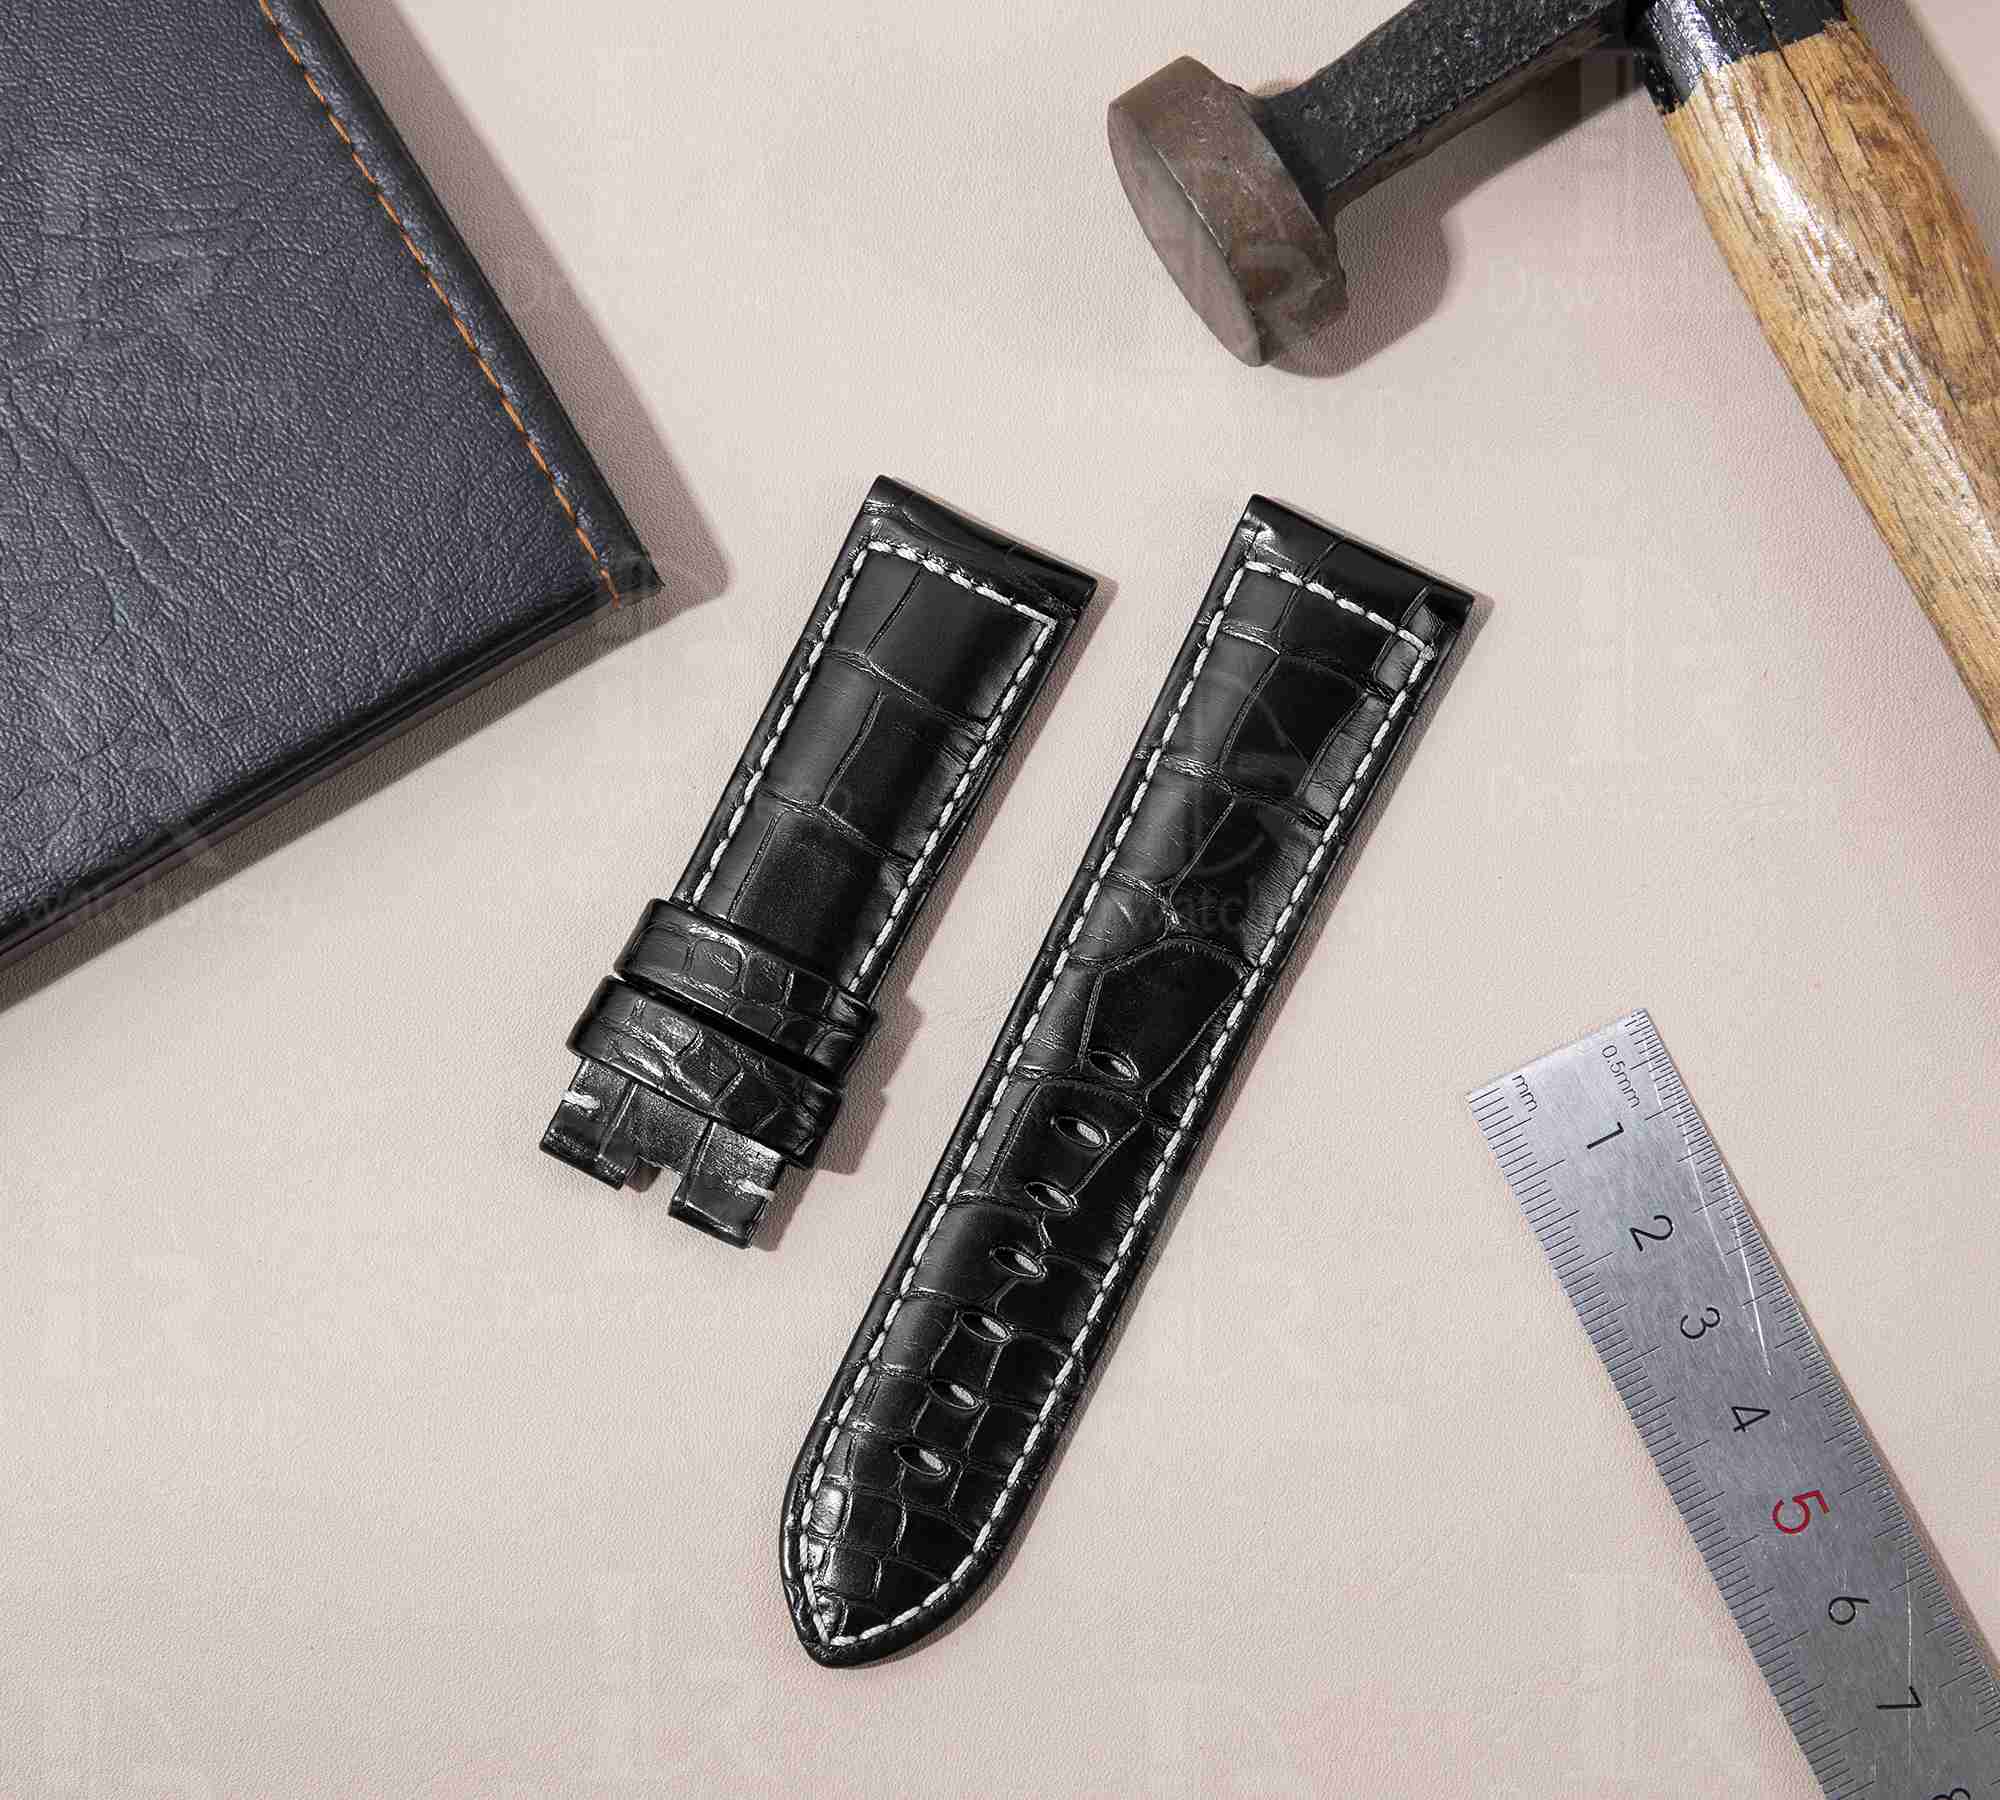 Genuine best quality OEM handmade custom Black Panerai Alligator Strap and watch band replacement 22mm 24mm for Panerai Luminor Due luxury watches from dr watchstrap for sale - Shop the premium crocodile material leather straps and watchbands online at a low price